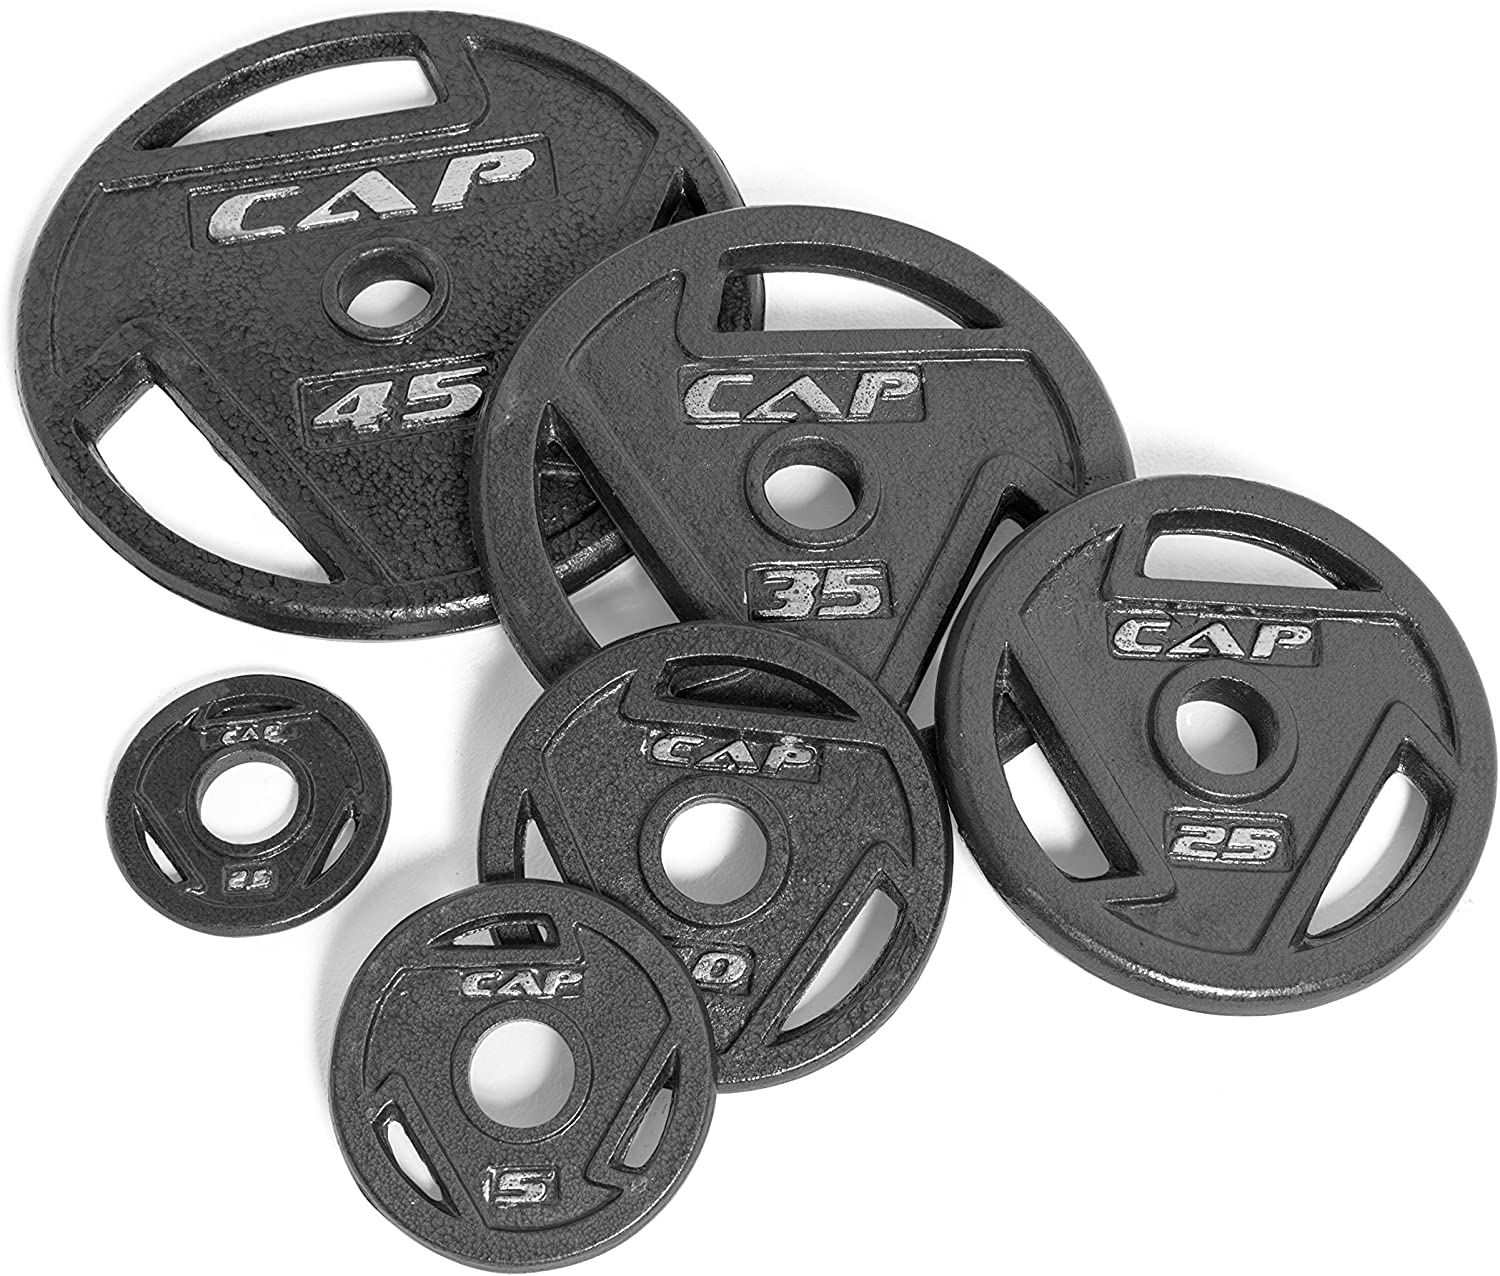 CAP Barbell Cast Iron 2-inch Olympic Grip Plates